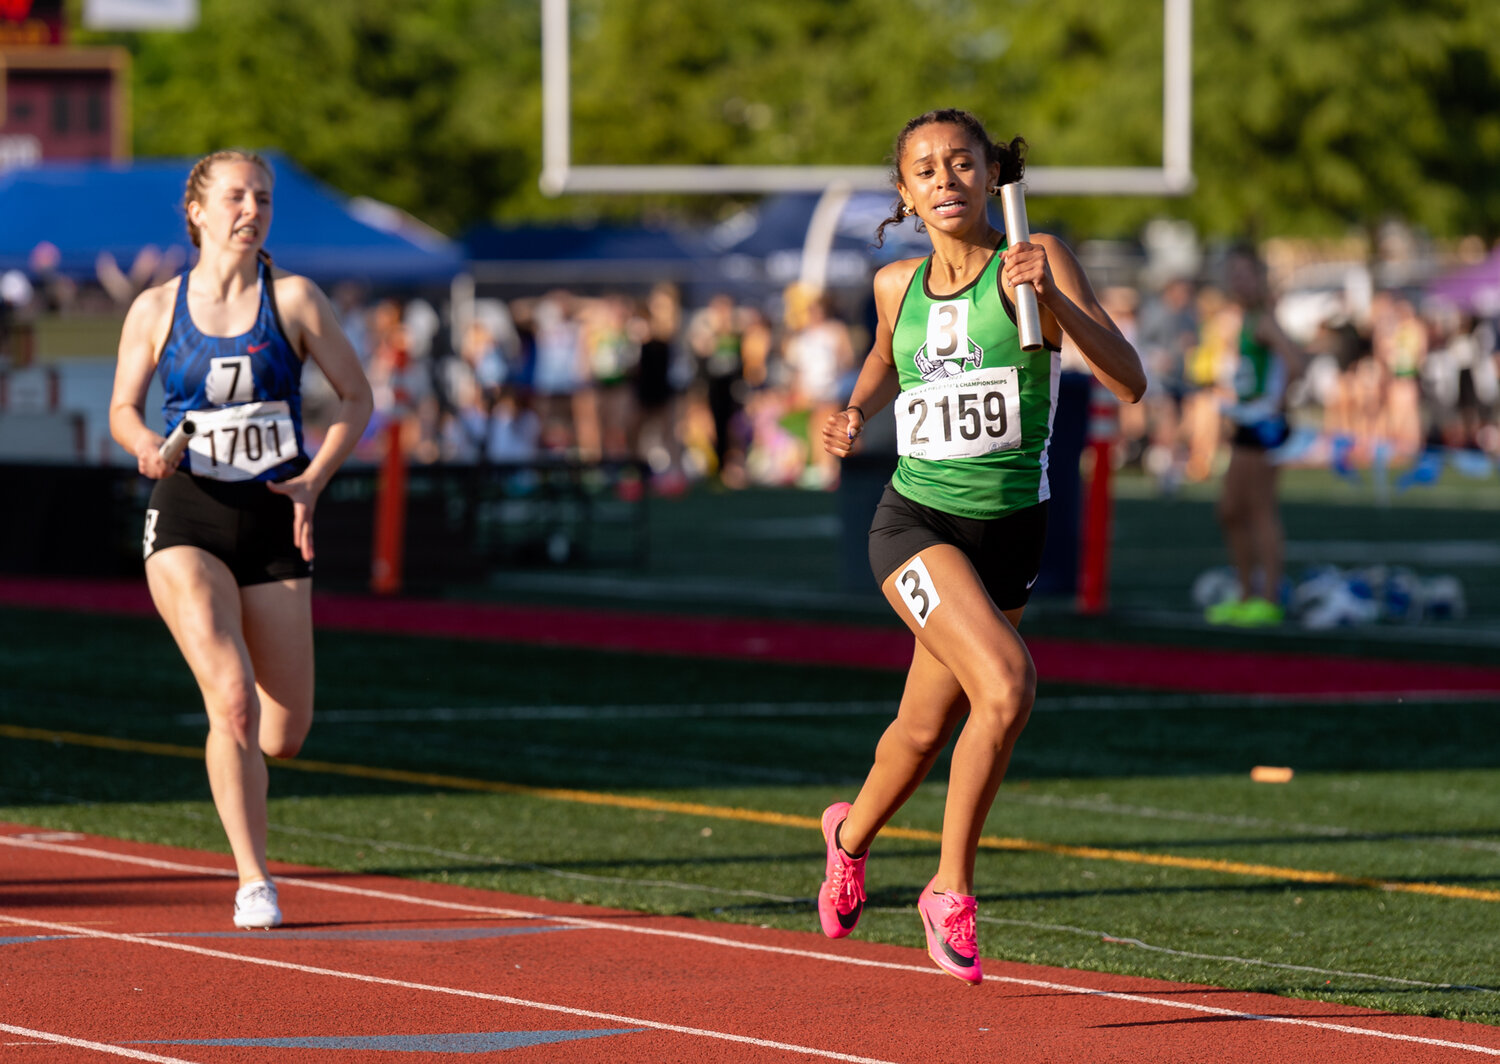 Tumwater’s Ava Jones breaks free from the pack to win the heat in the girls 4x400 preliminary relay at the WIAA 2A/3A/4A State Track and Field Championships on Thursday, May 25, 2023, at Mount Tahoma High School in Tacoma. (Joshua Hart/For The Chronicle)